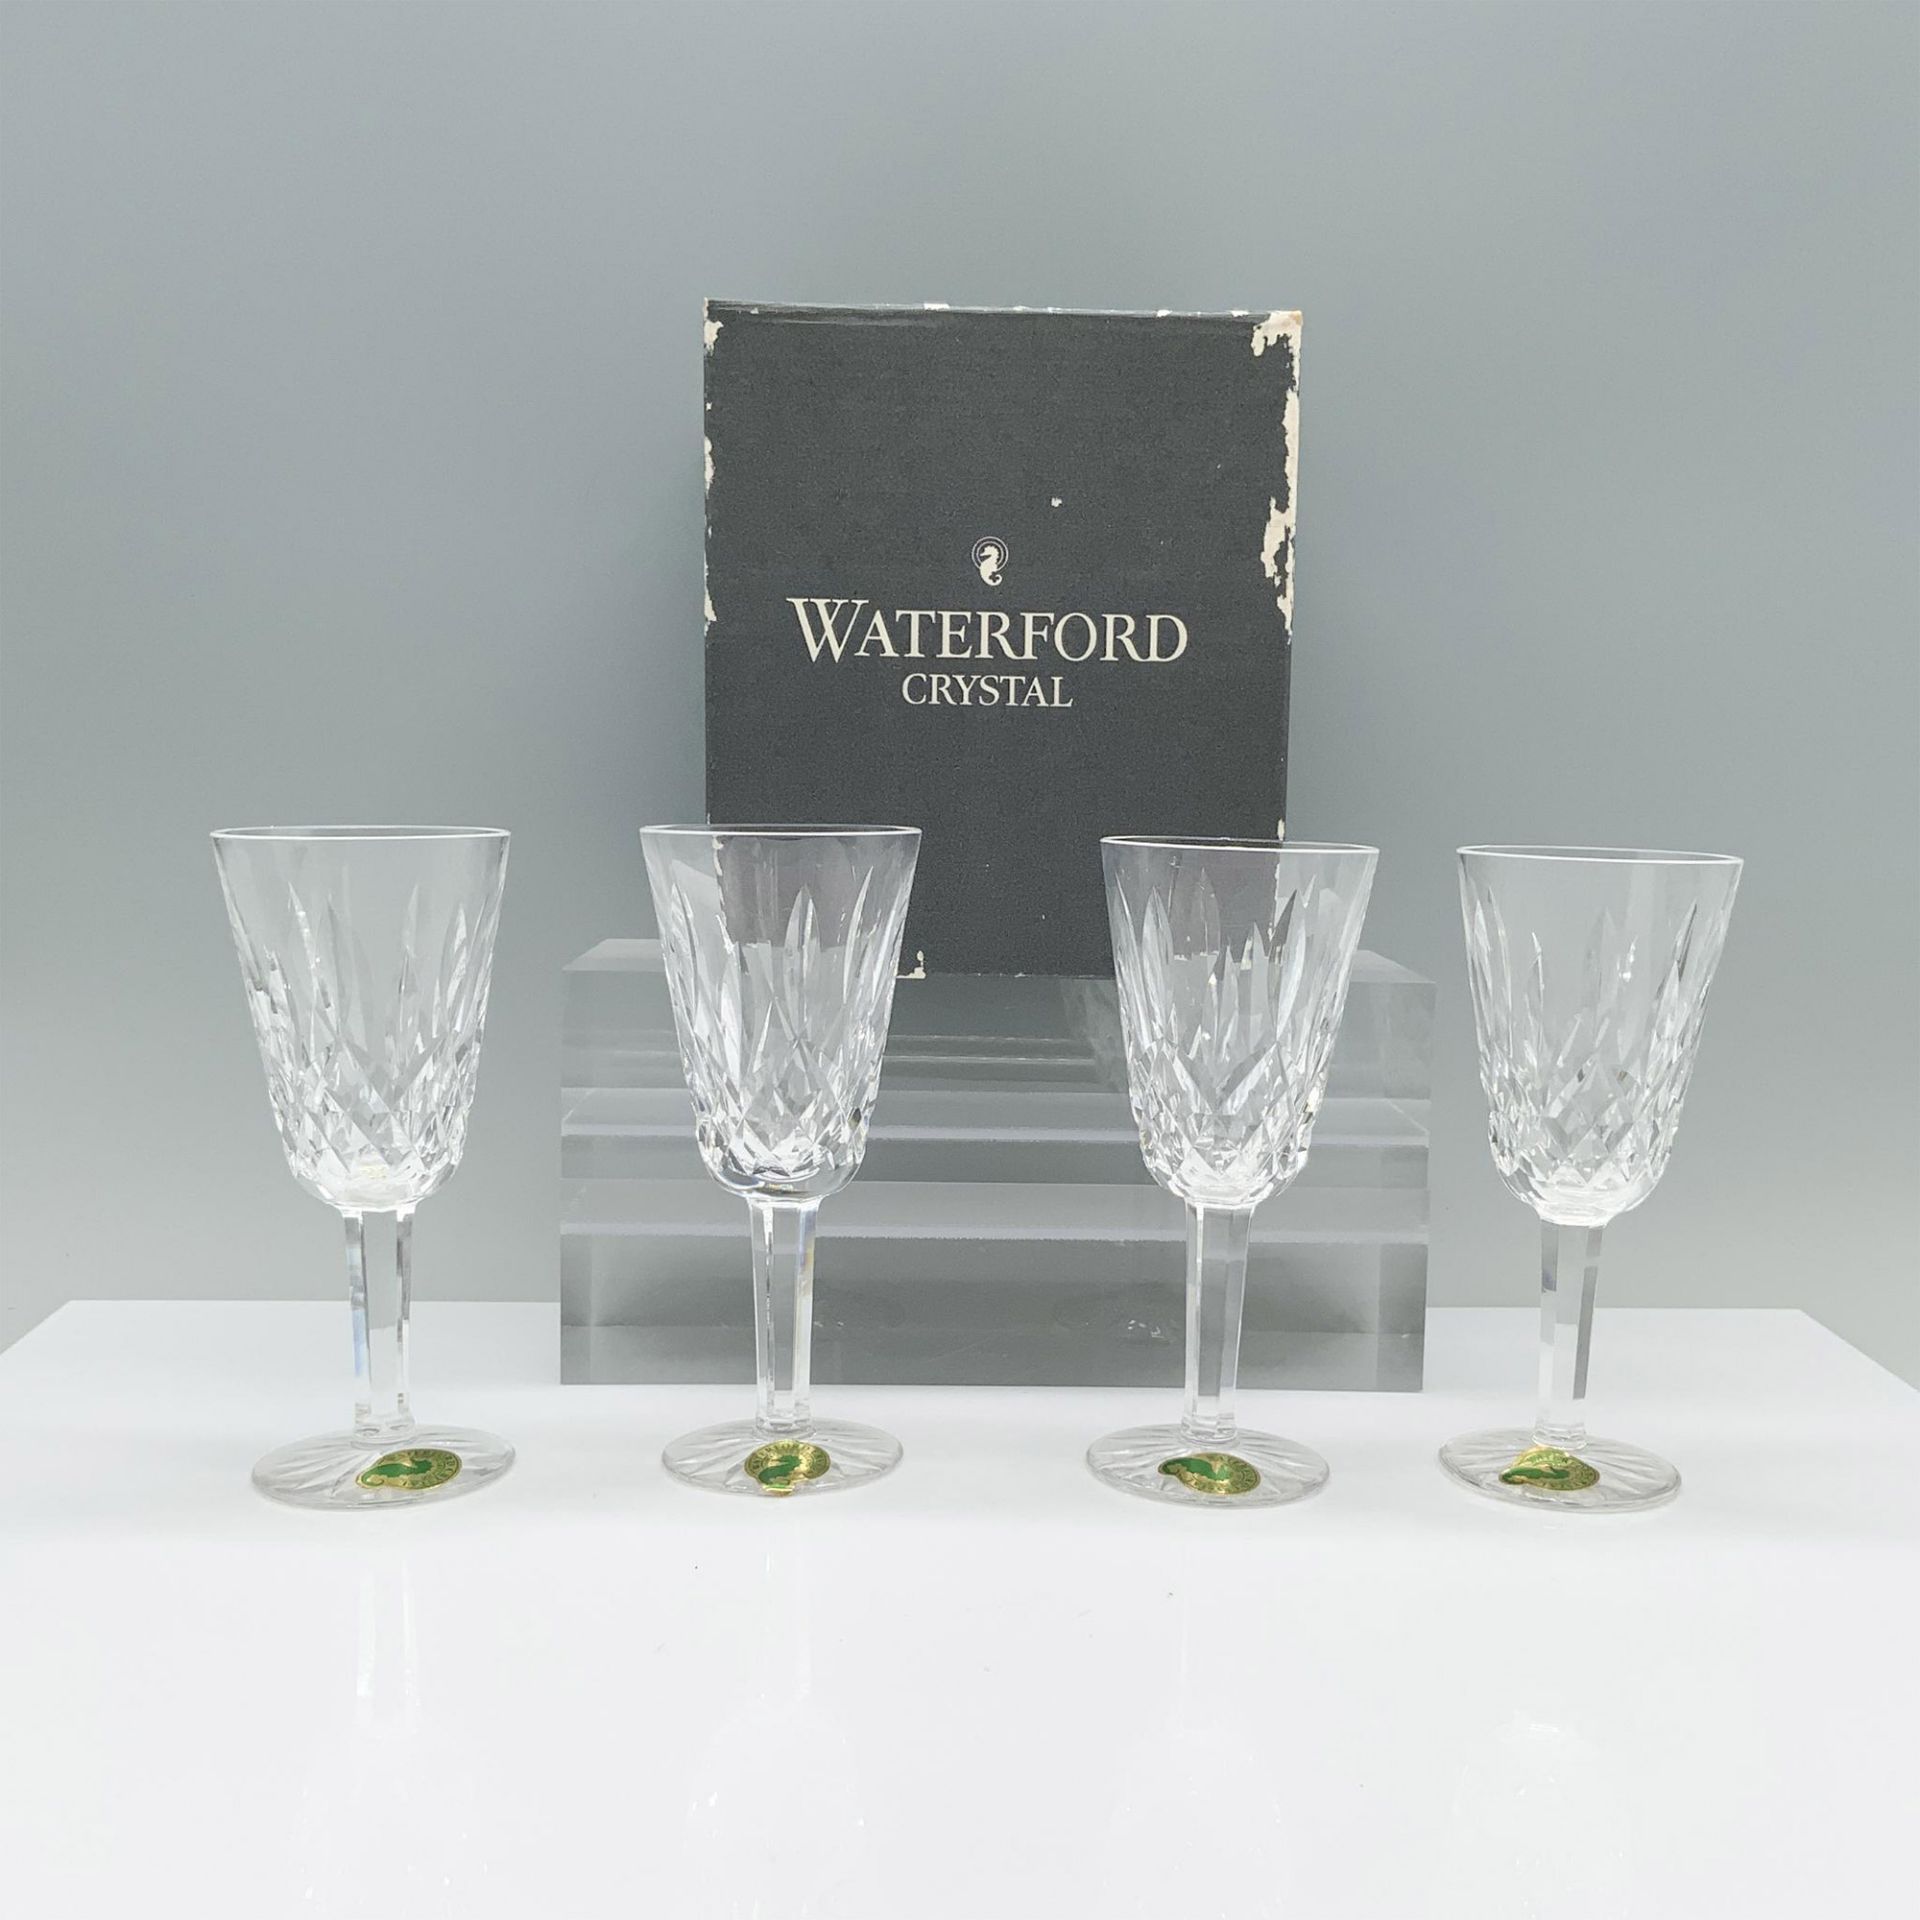 4pc Waterford Crystal Sherry Glass, Lismore - Image 4 of 4